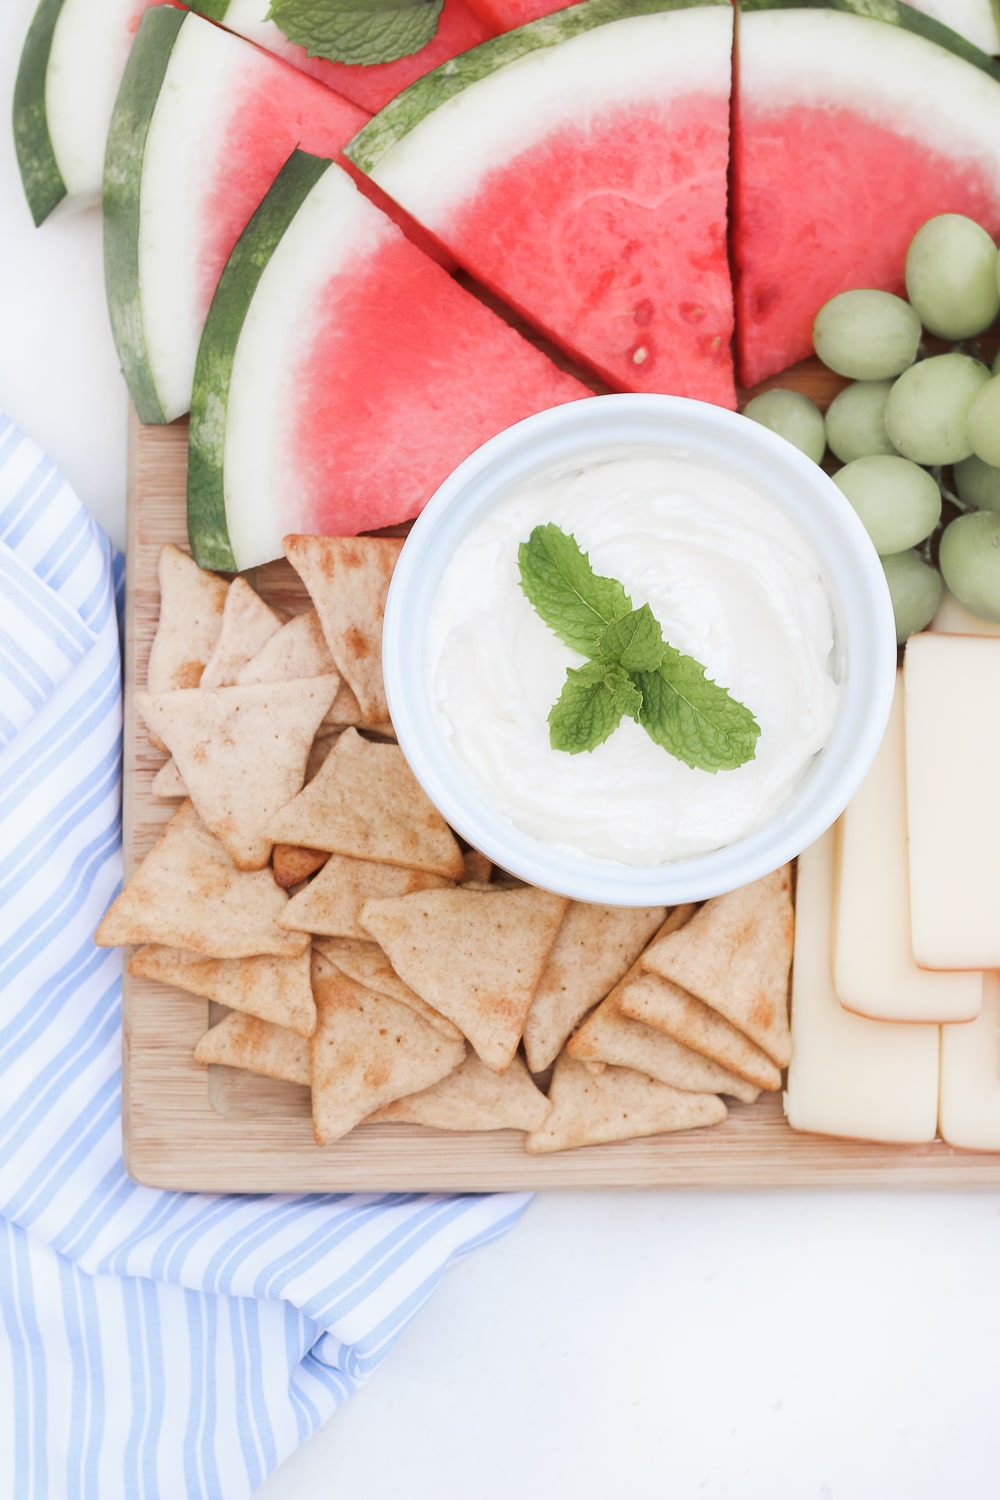 Simple whipped feta dip adapted by blogger Stephanie Ziajka on Diary of a Debutante